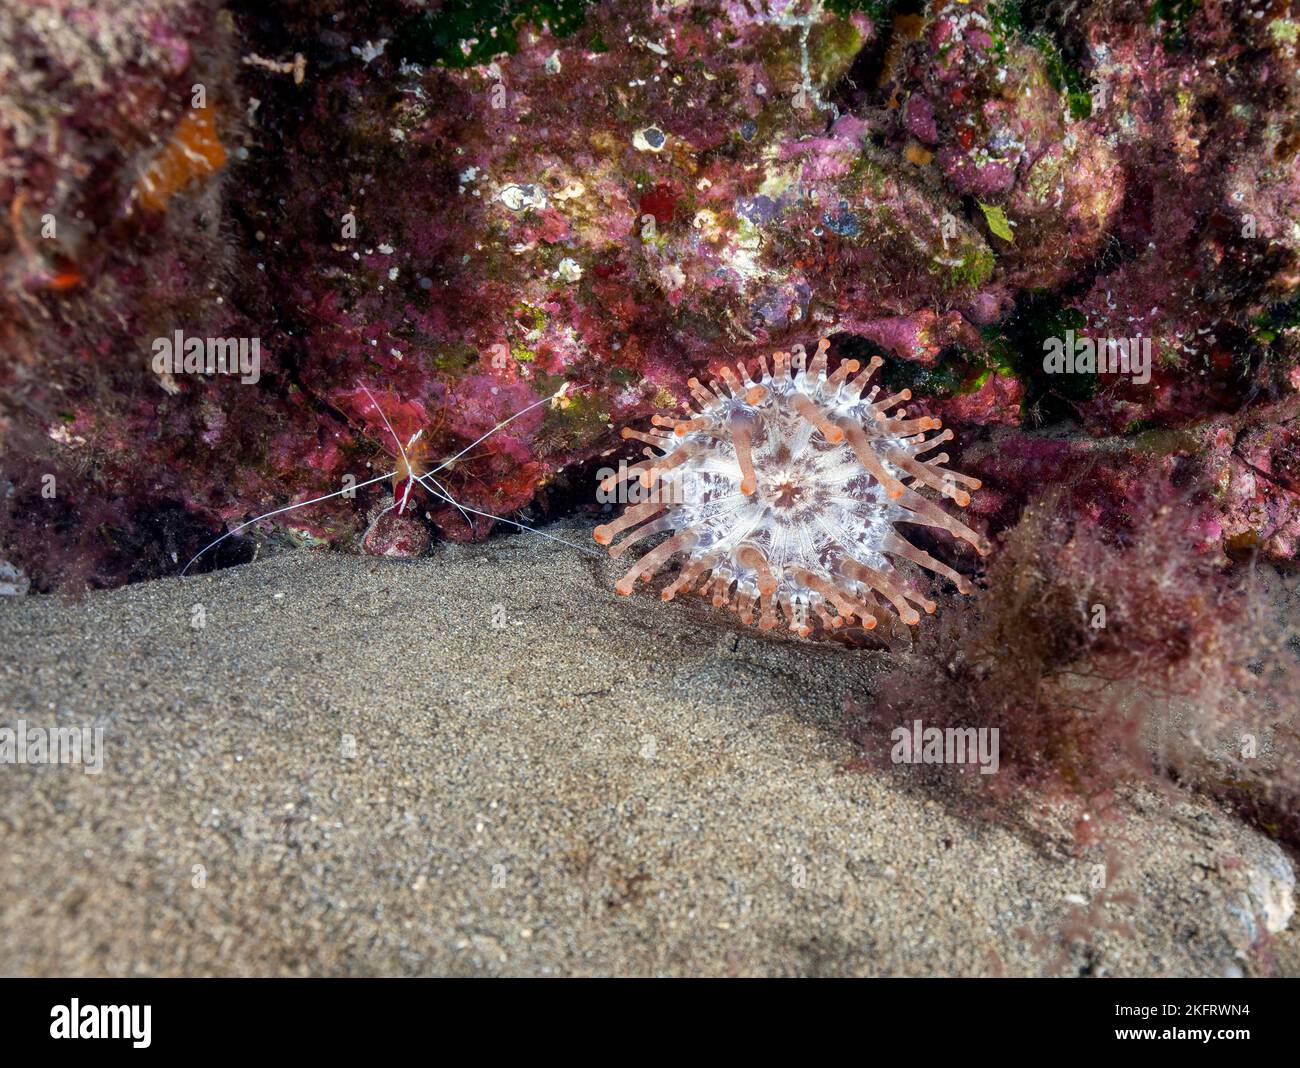 Club-tipped anemone (Telmatactis cricoides) with Atlantic white banded cleaner shrimp (Lysmata grabhami), Lanzarote. Canary Islands, Spain, Europe Stock Photo